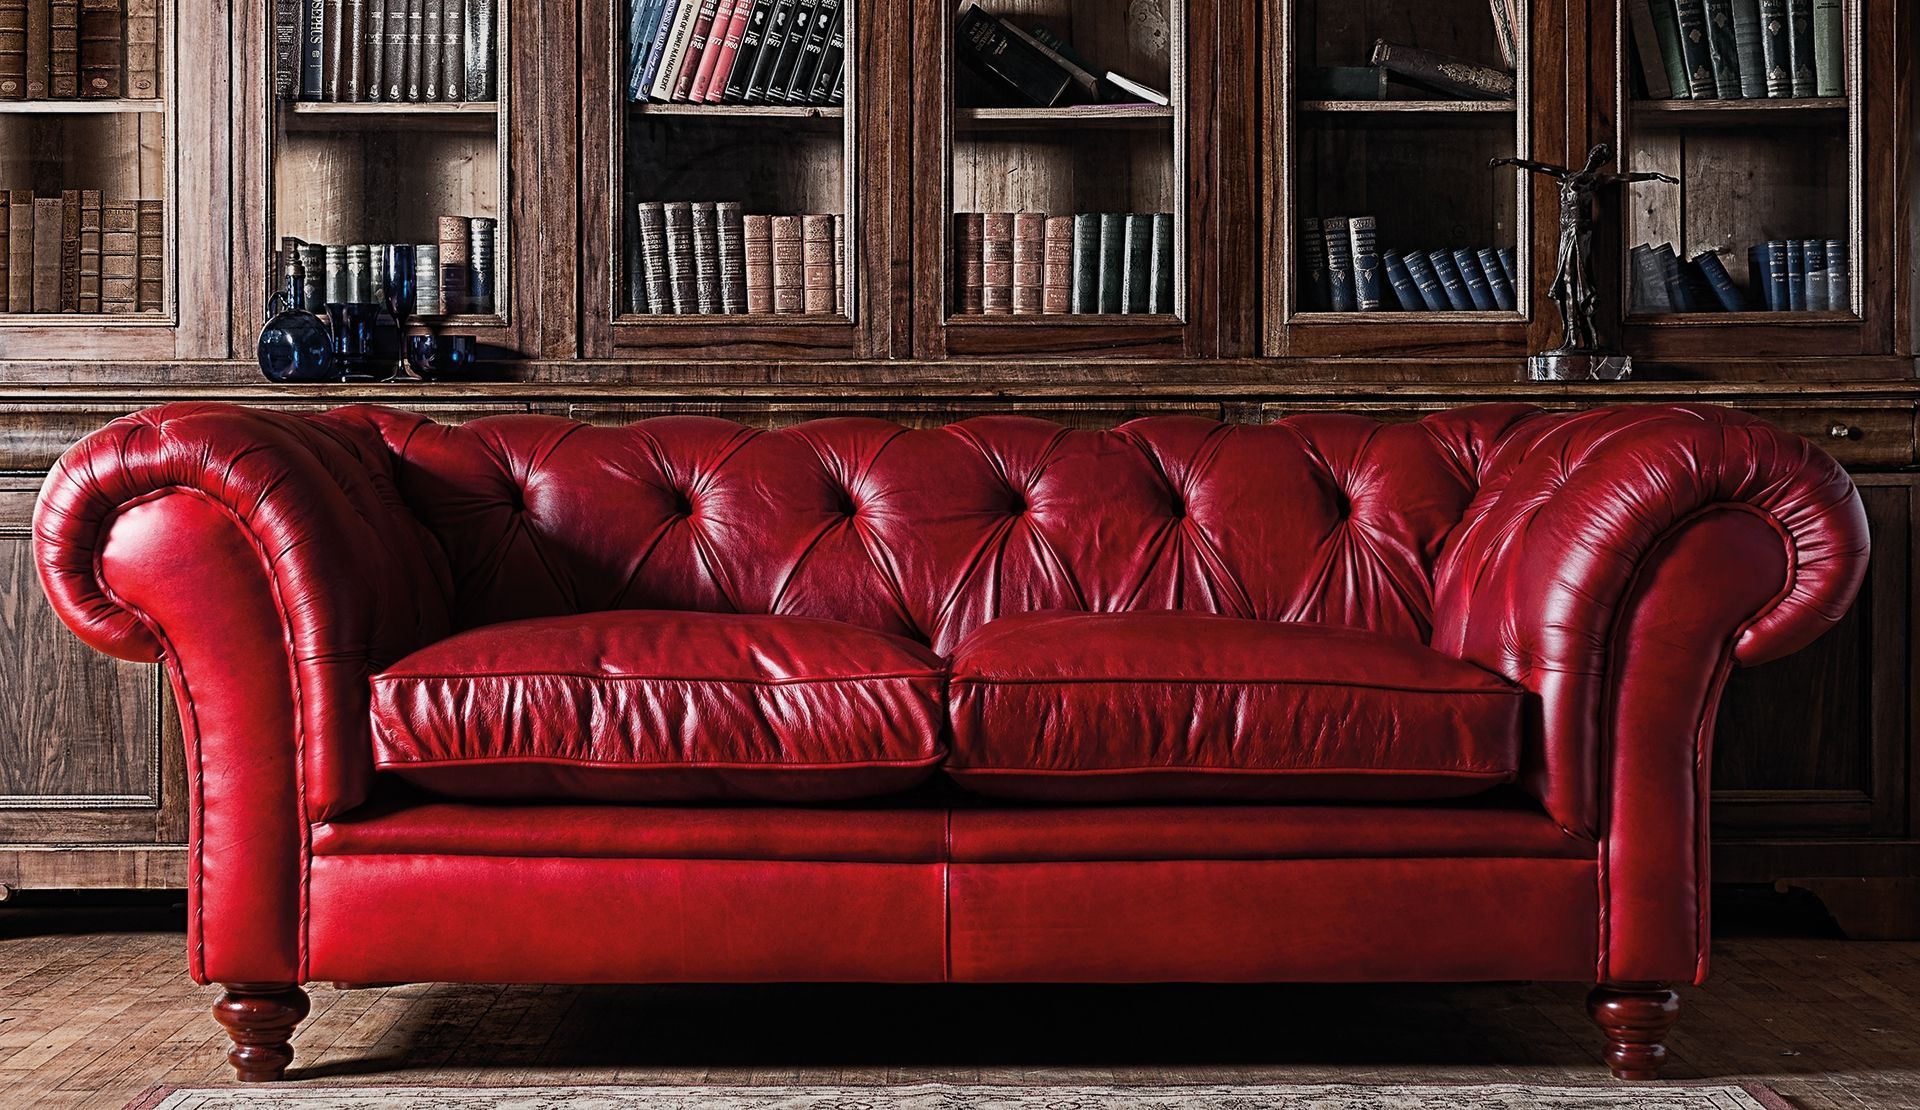 20 Reasons To Love Chesterfield Sofas Chesterfield Chesterfield Within Chesterfield Furniture (View 9 of 15)